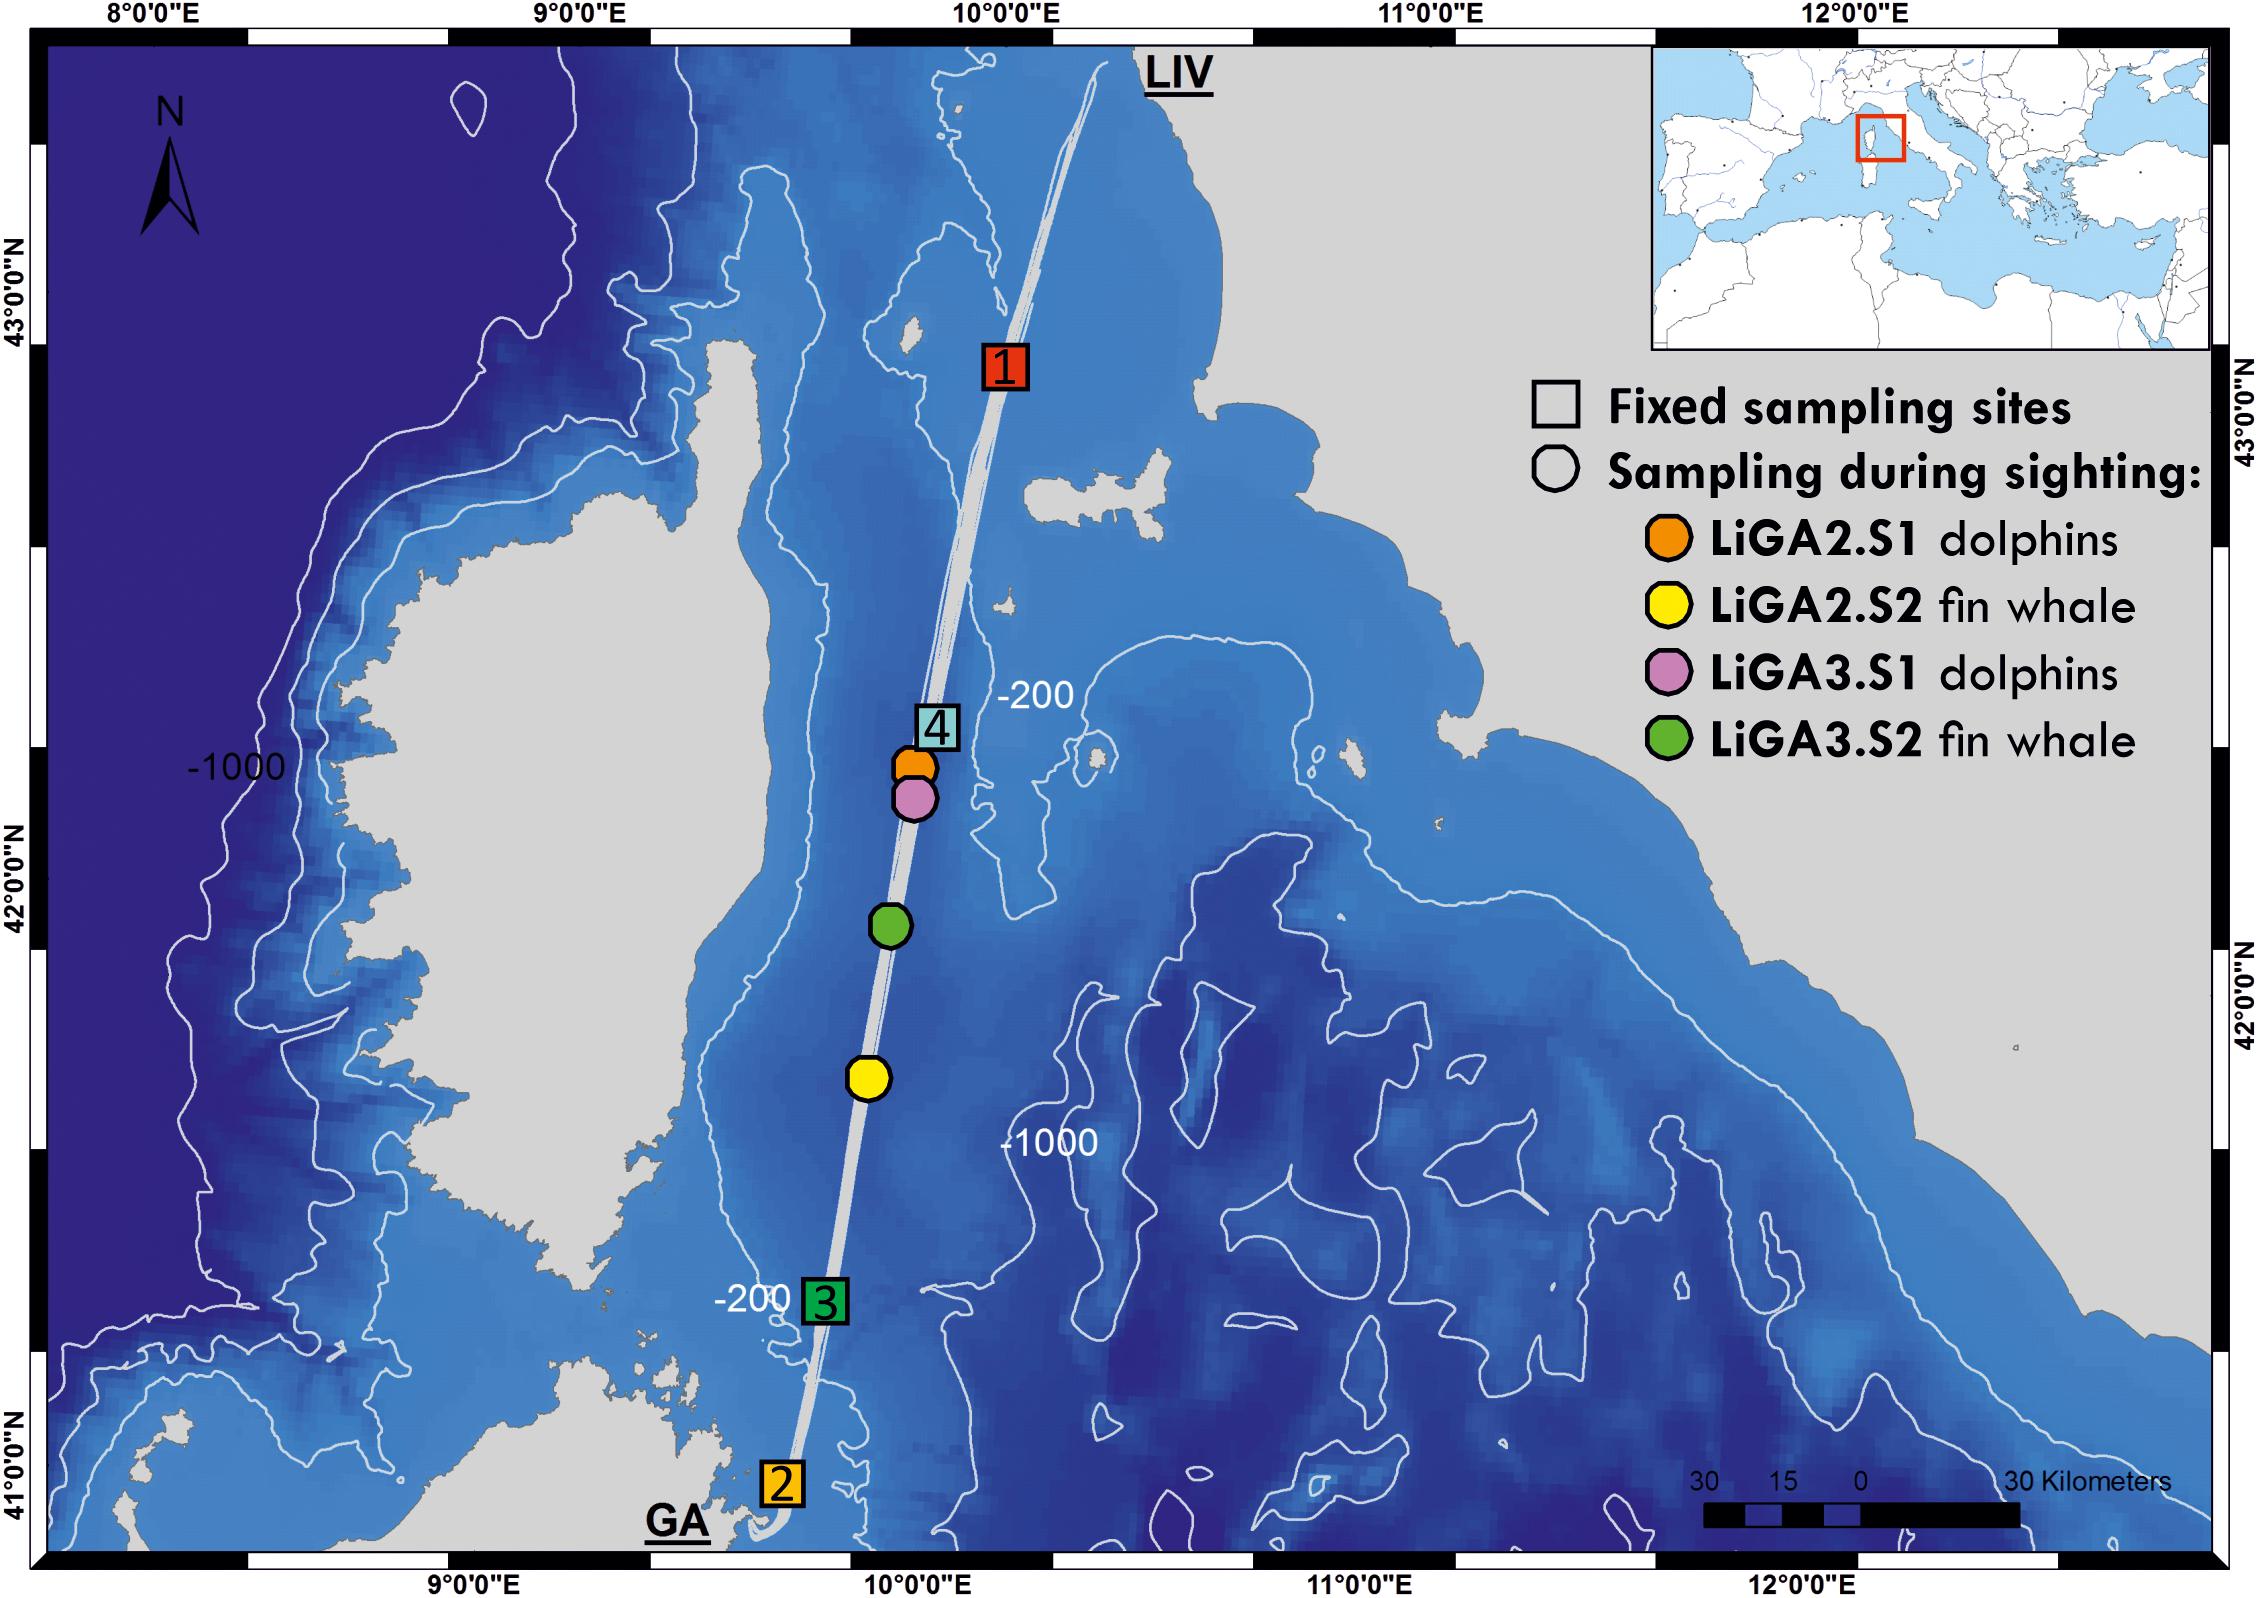 Frontiers Ferries and Environmental DNA Underway Sampling From Commercial Vessels Provides New Opportunities for Systematic Genetic Surveys of Marine Biodiversity